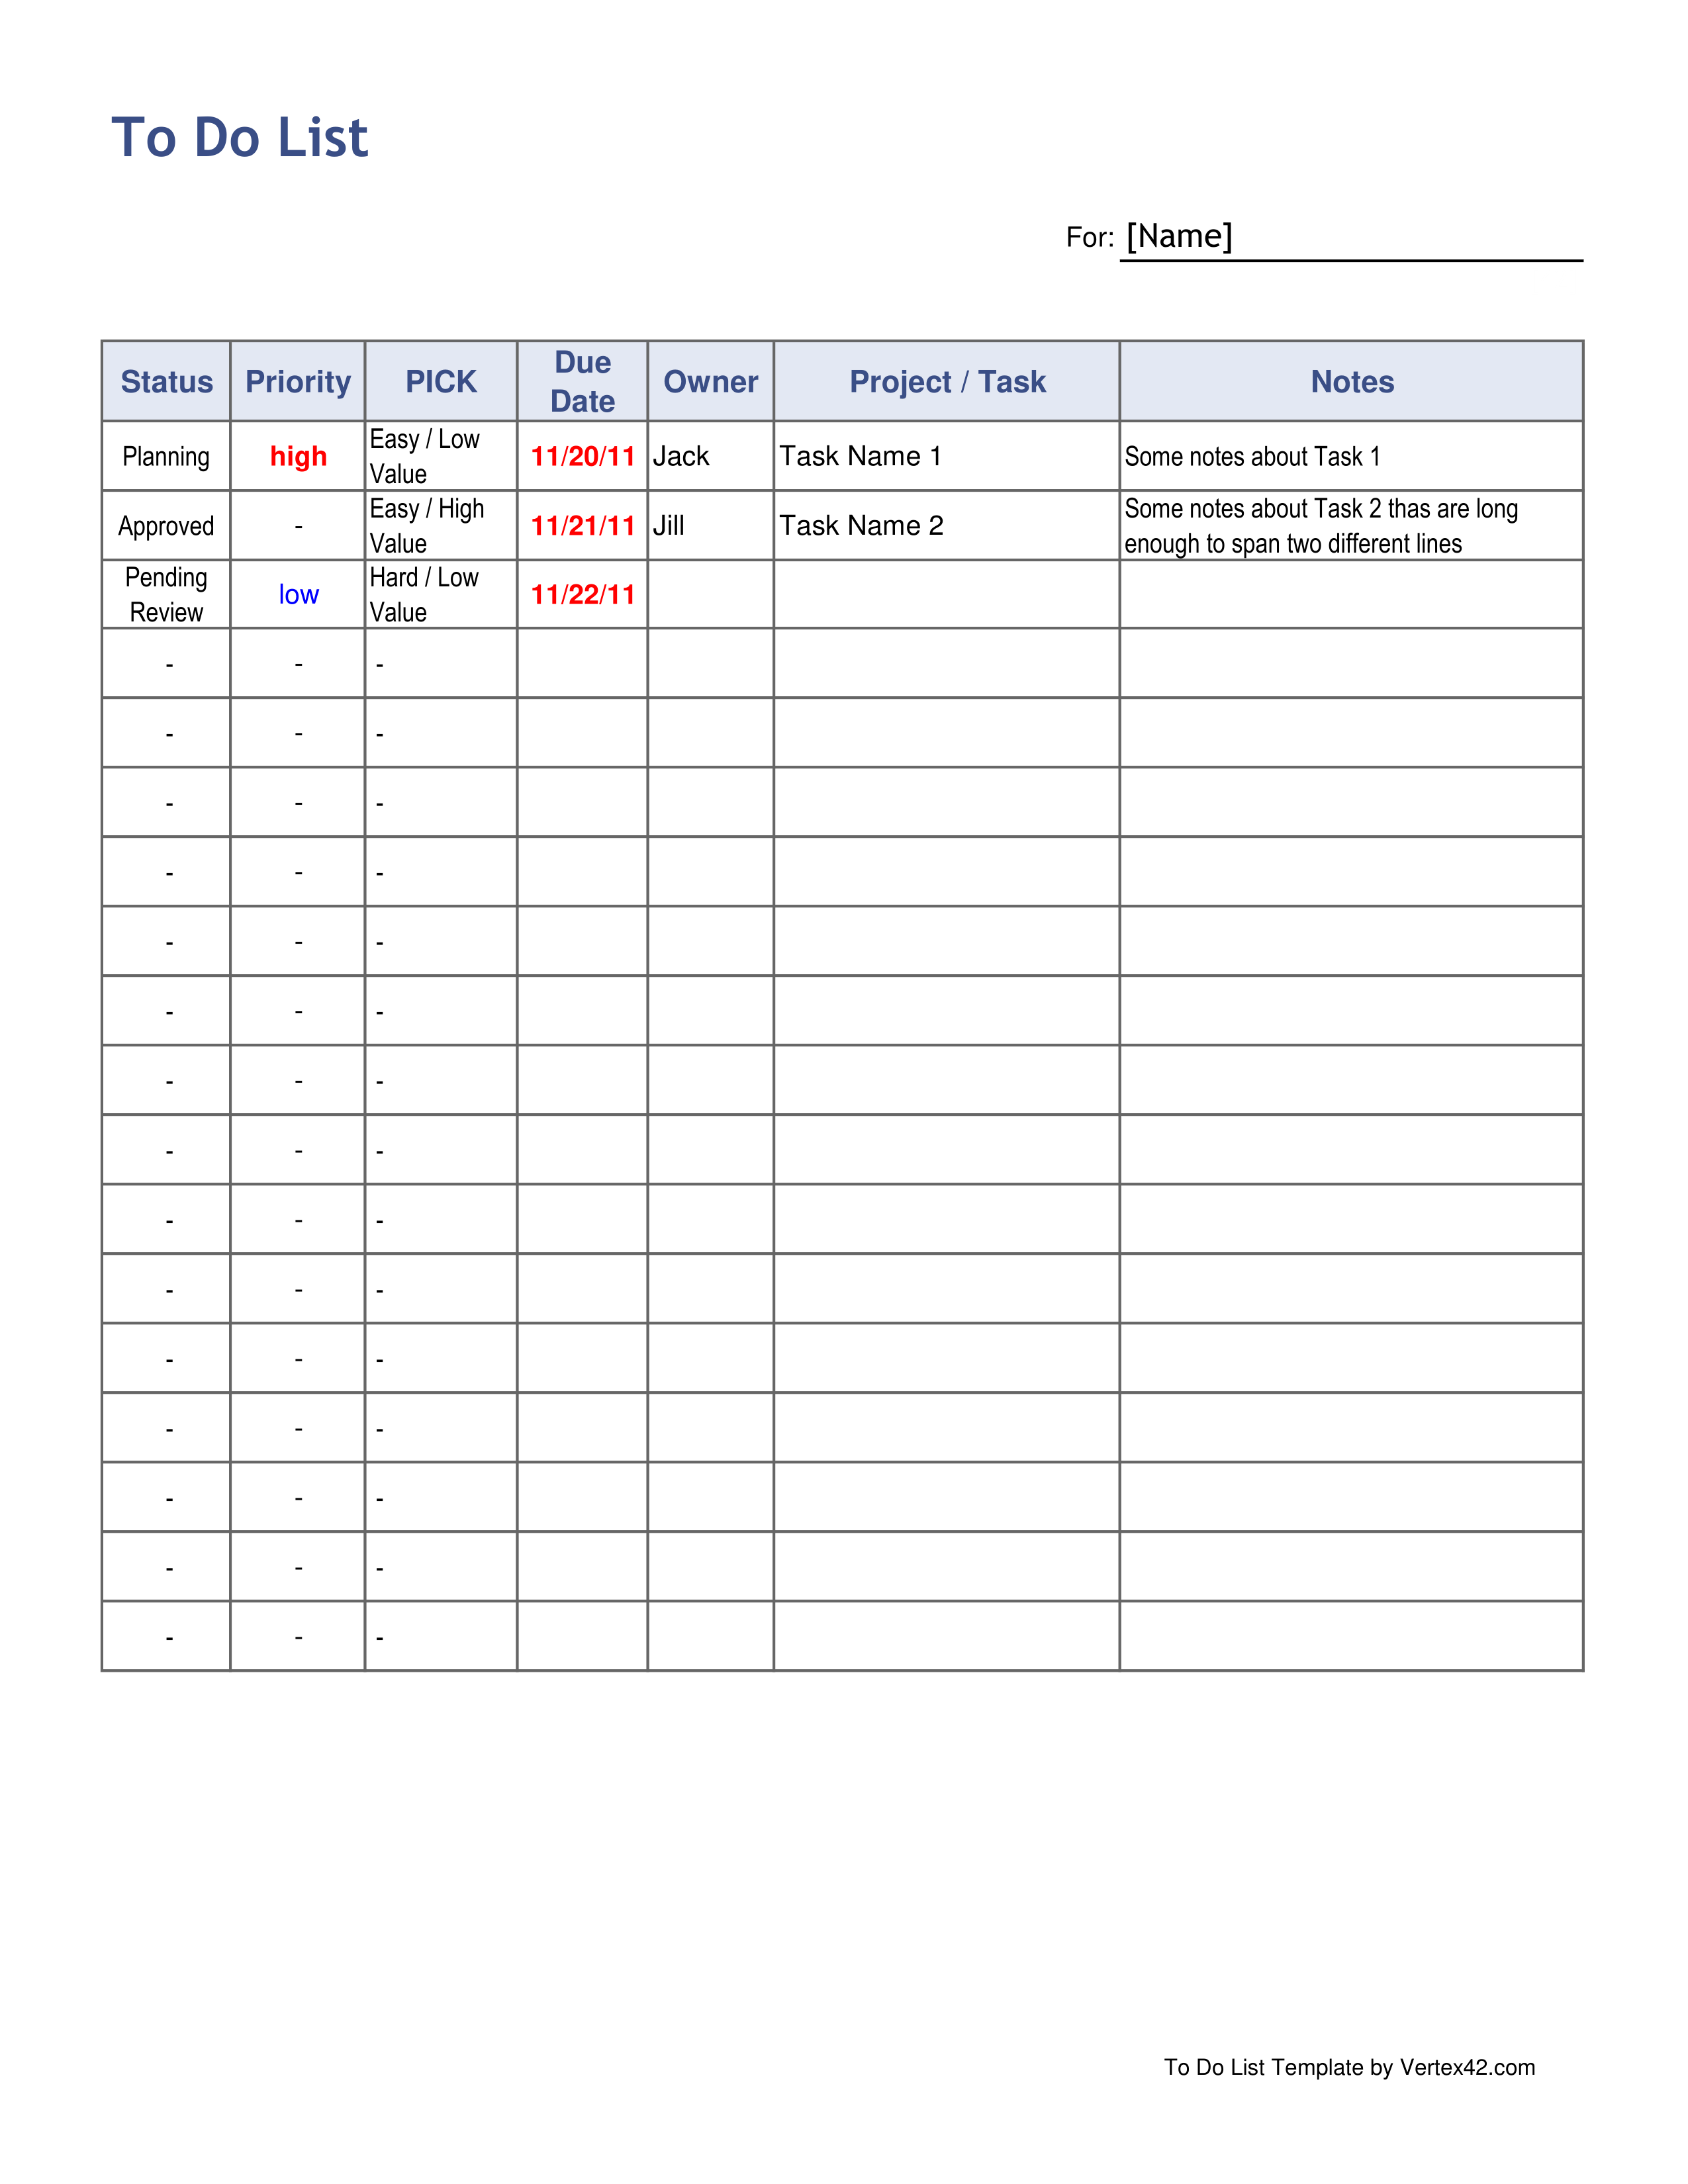 To Do List Template To Do List Templates Download Task List PDF